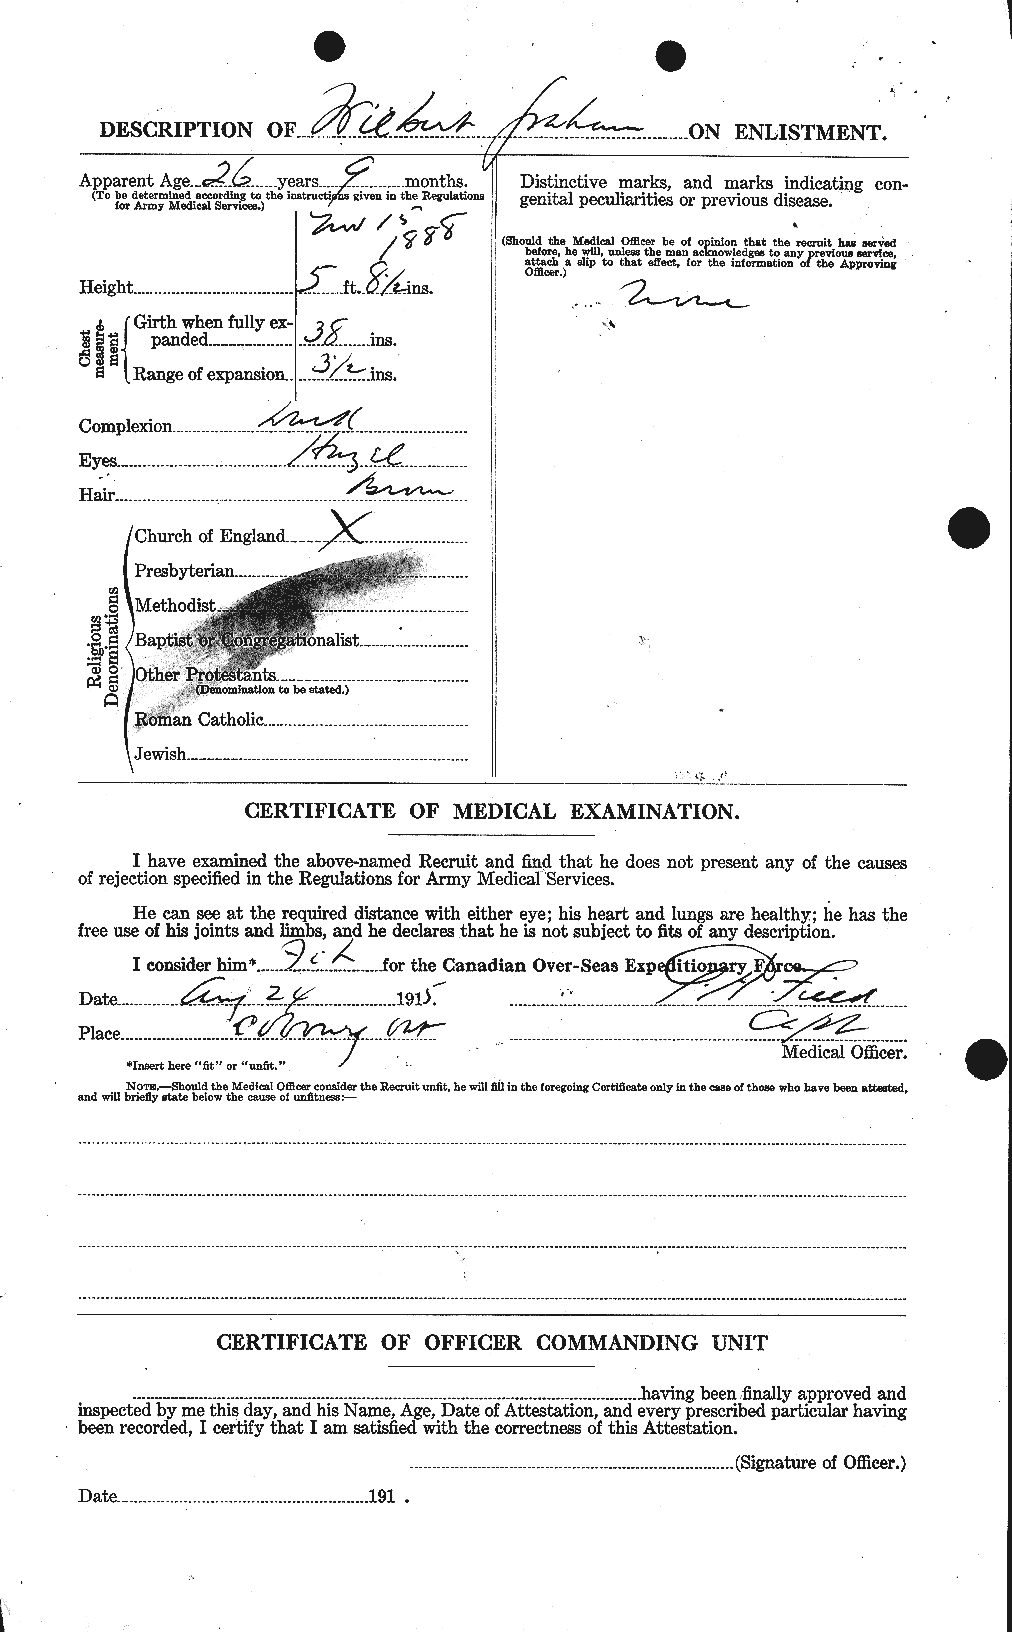 Personnel Records of the First World War - CEF 362668b